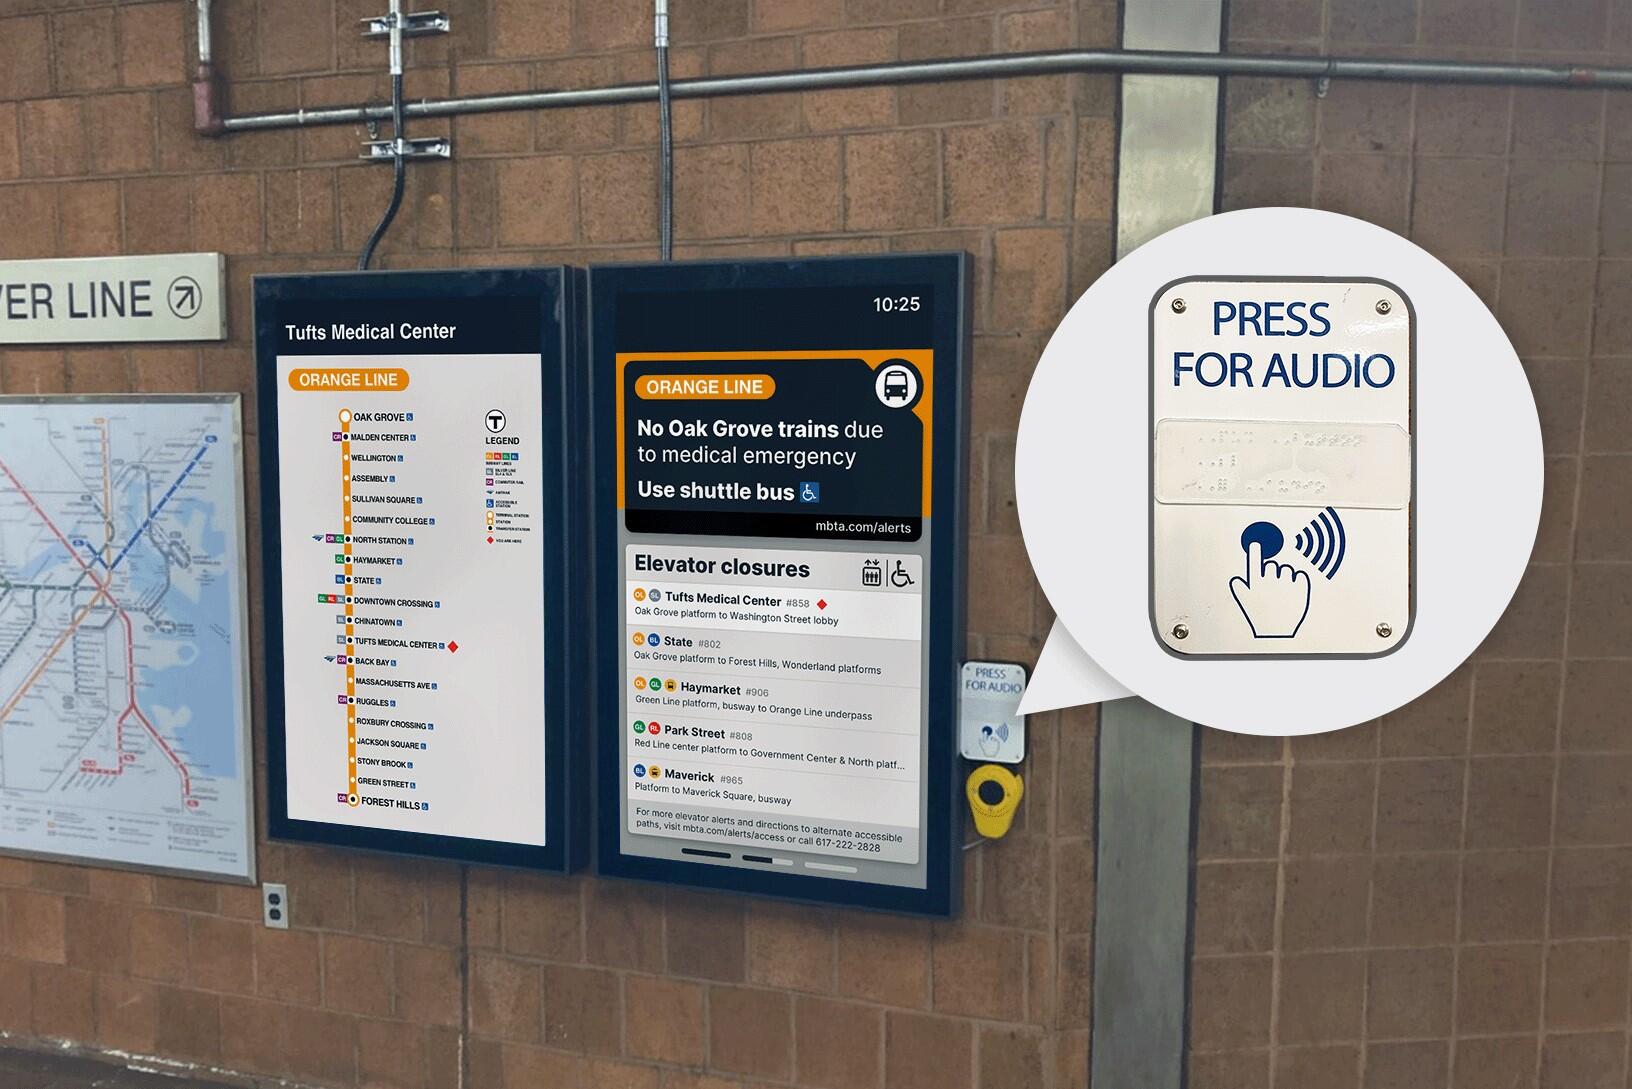 Two side-by-side digital screens hang on a wall in Tufts Medical Center station. One screen shows  an Orange Line map, the other shows an alert about shuttles replacing Orange Line service towards Oak Grove, and a list of elevator closures. Next to the screens is a button with a label saying “Press for Audio,” which is also written in braille on the label. 